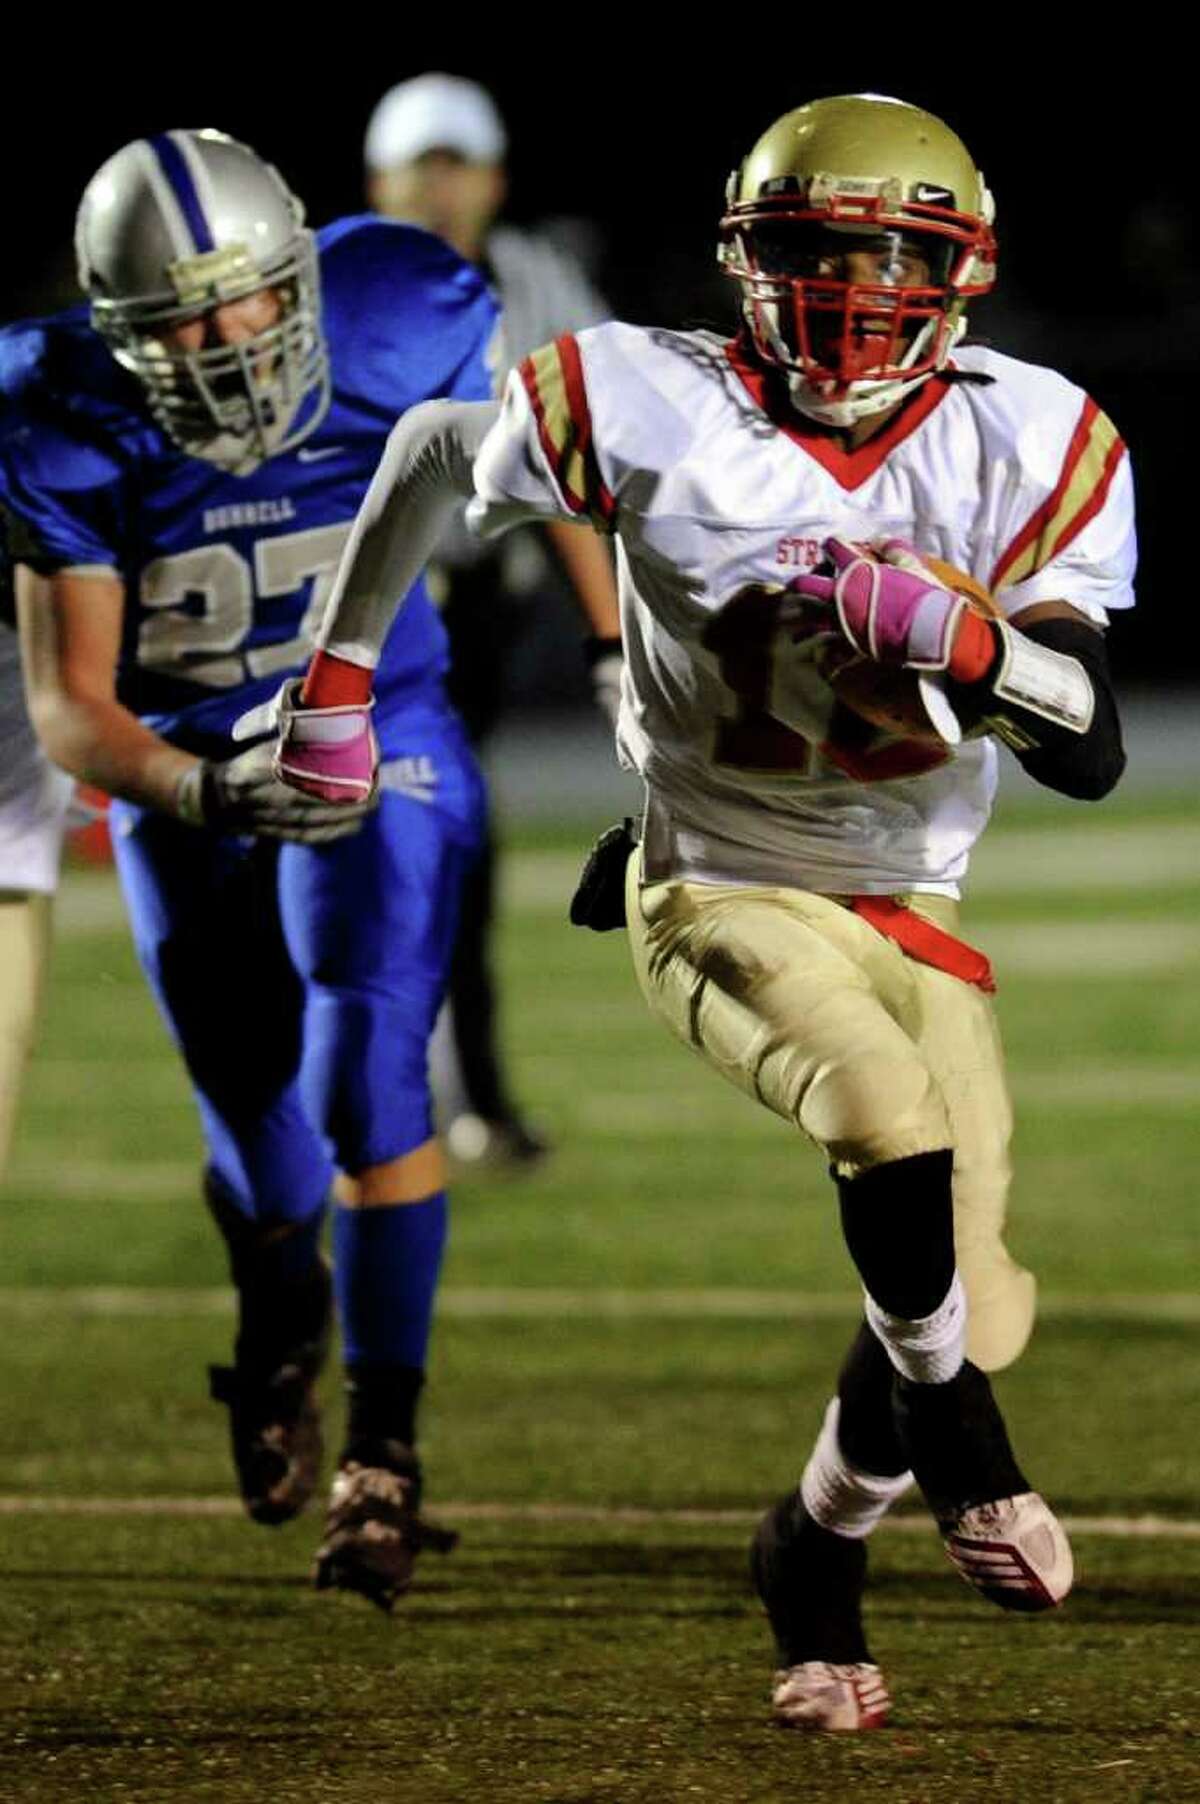 Stratford's Markey Desruisseaux carries the ball to a touchdown during Wednesday's game at Bunnell High School on November 24, 2010.